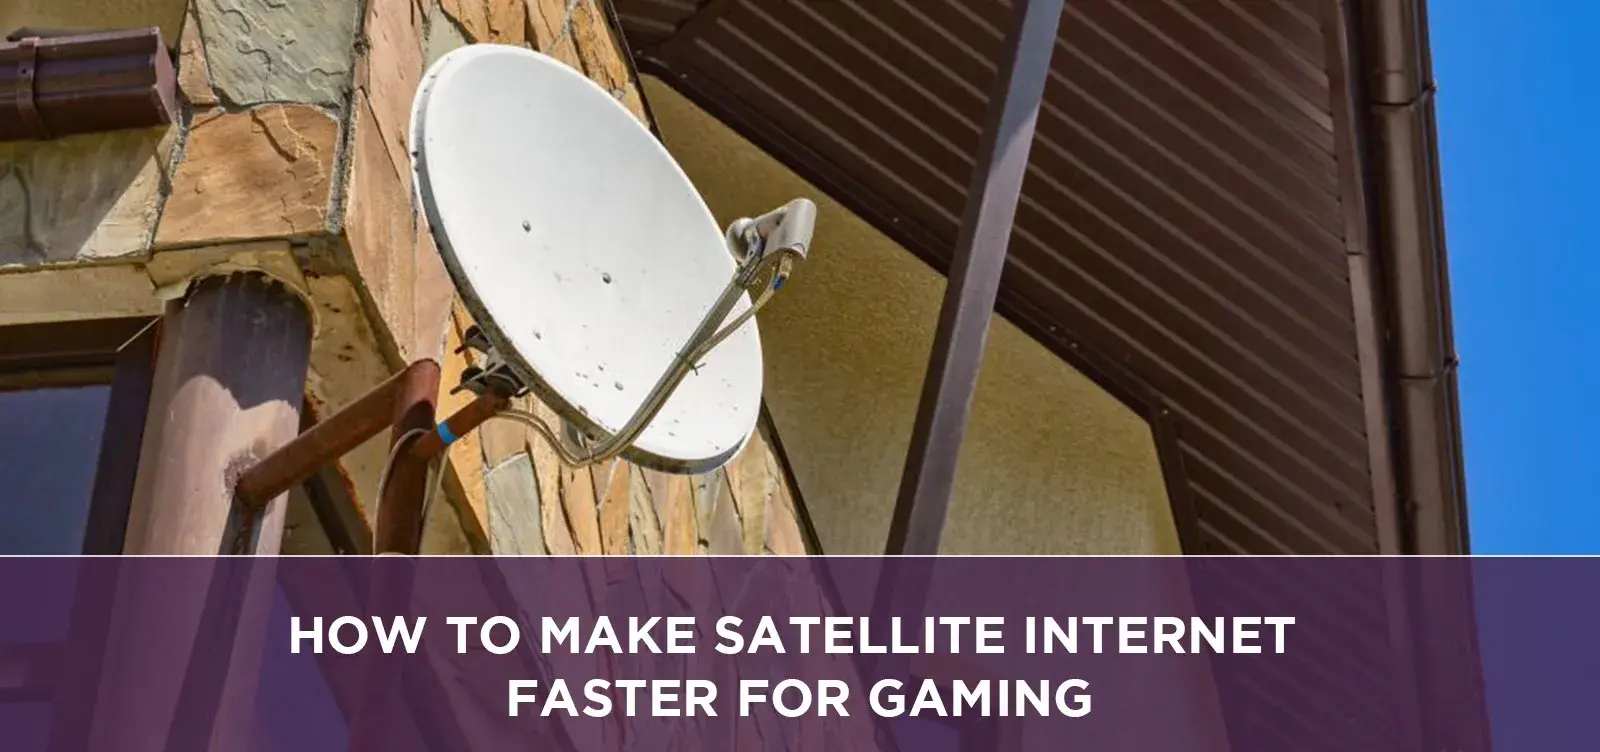 How To Make Satellite Internet Faster For Gaming?